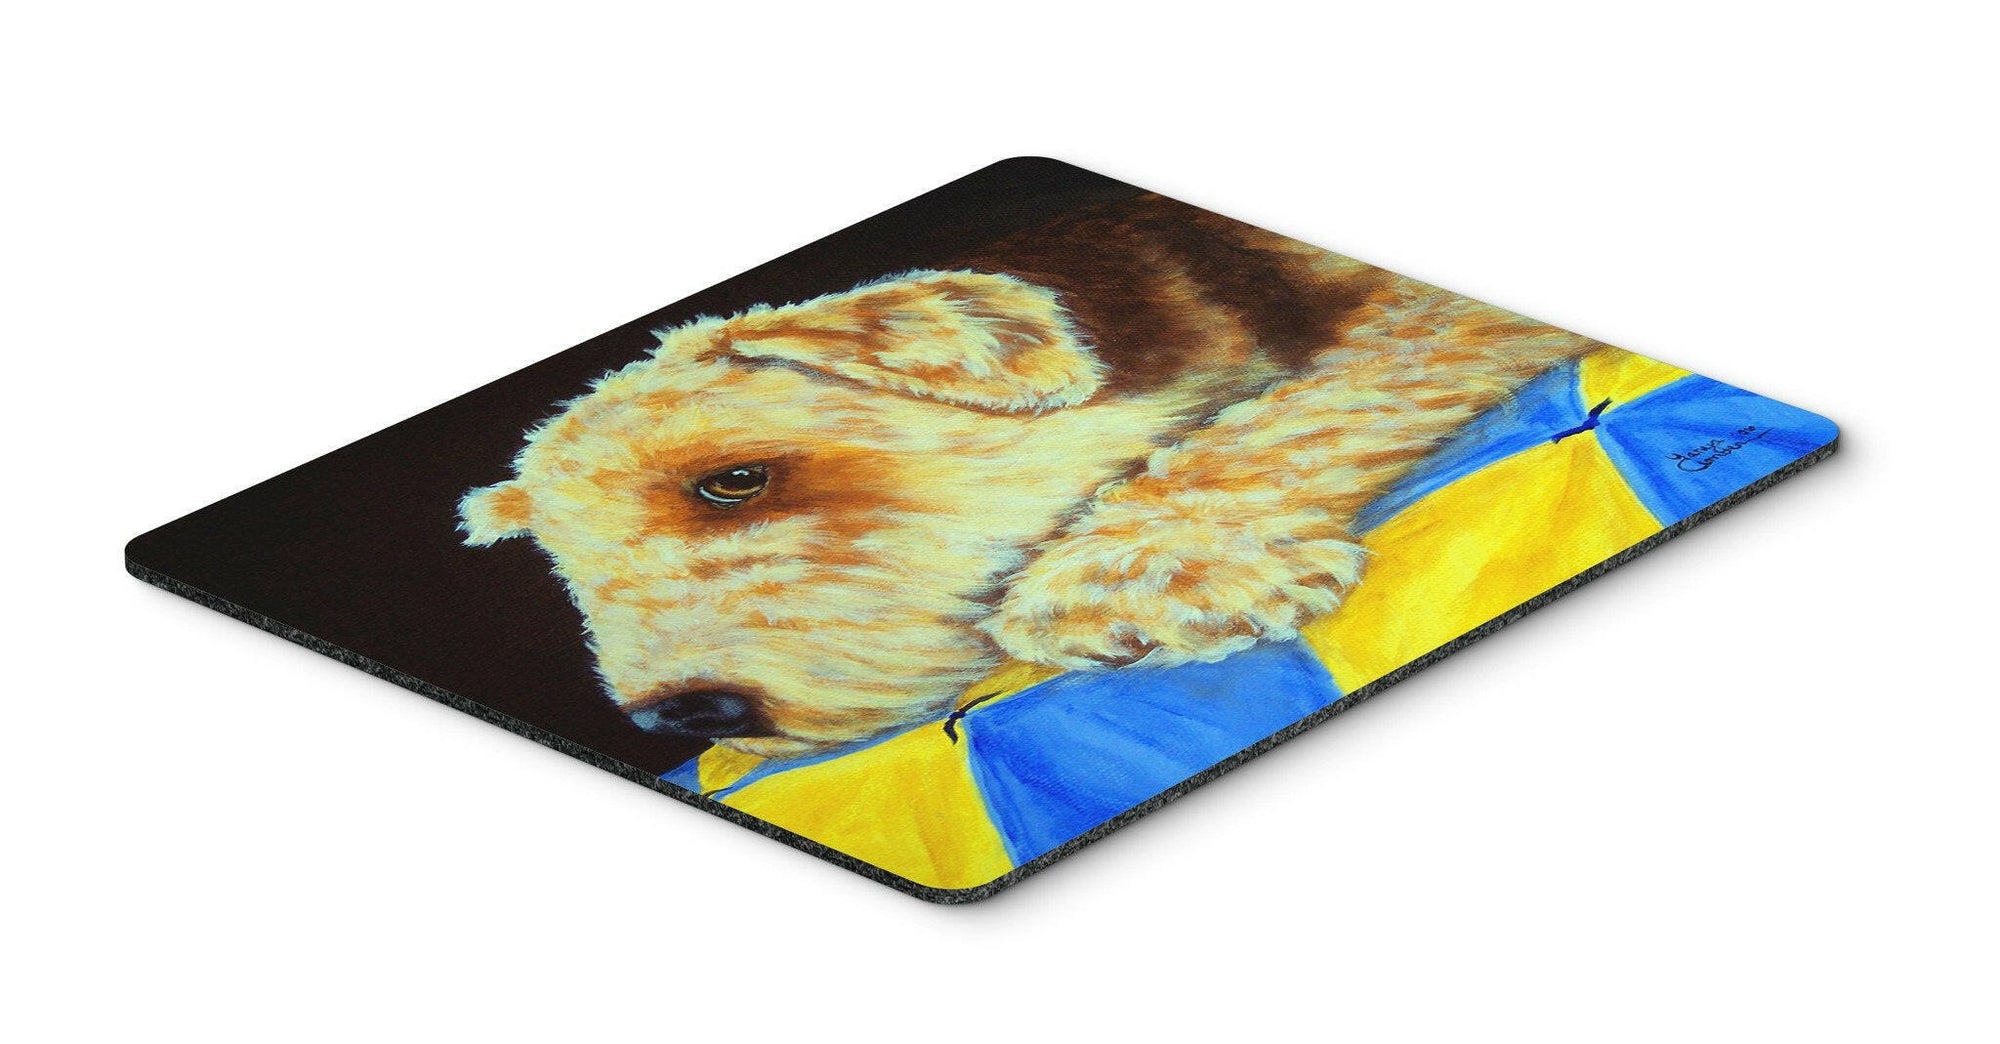 Airedale Terrier Momma's Quilt Mouse Pad, Hot Pad or Trivet AMB1174MP by Caroline's Treasures